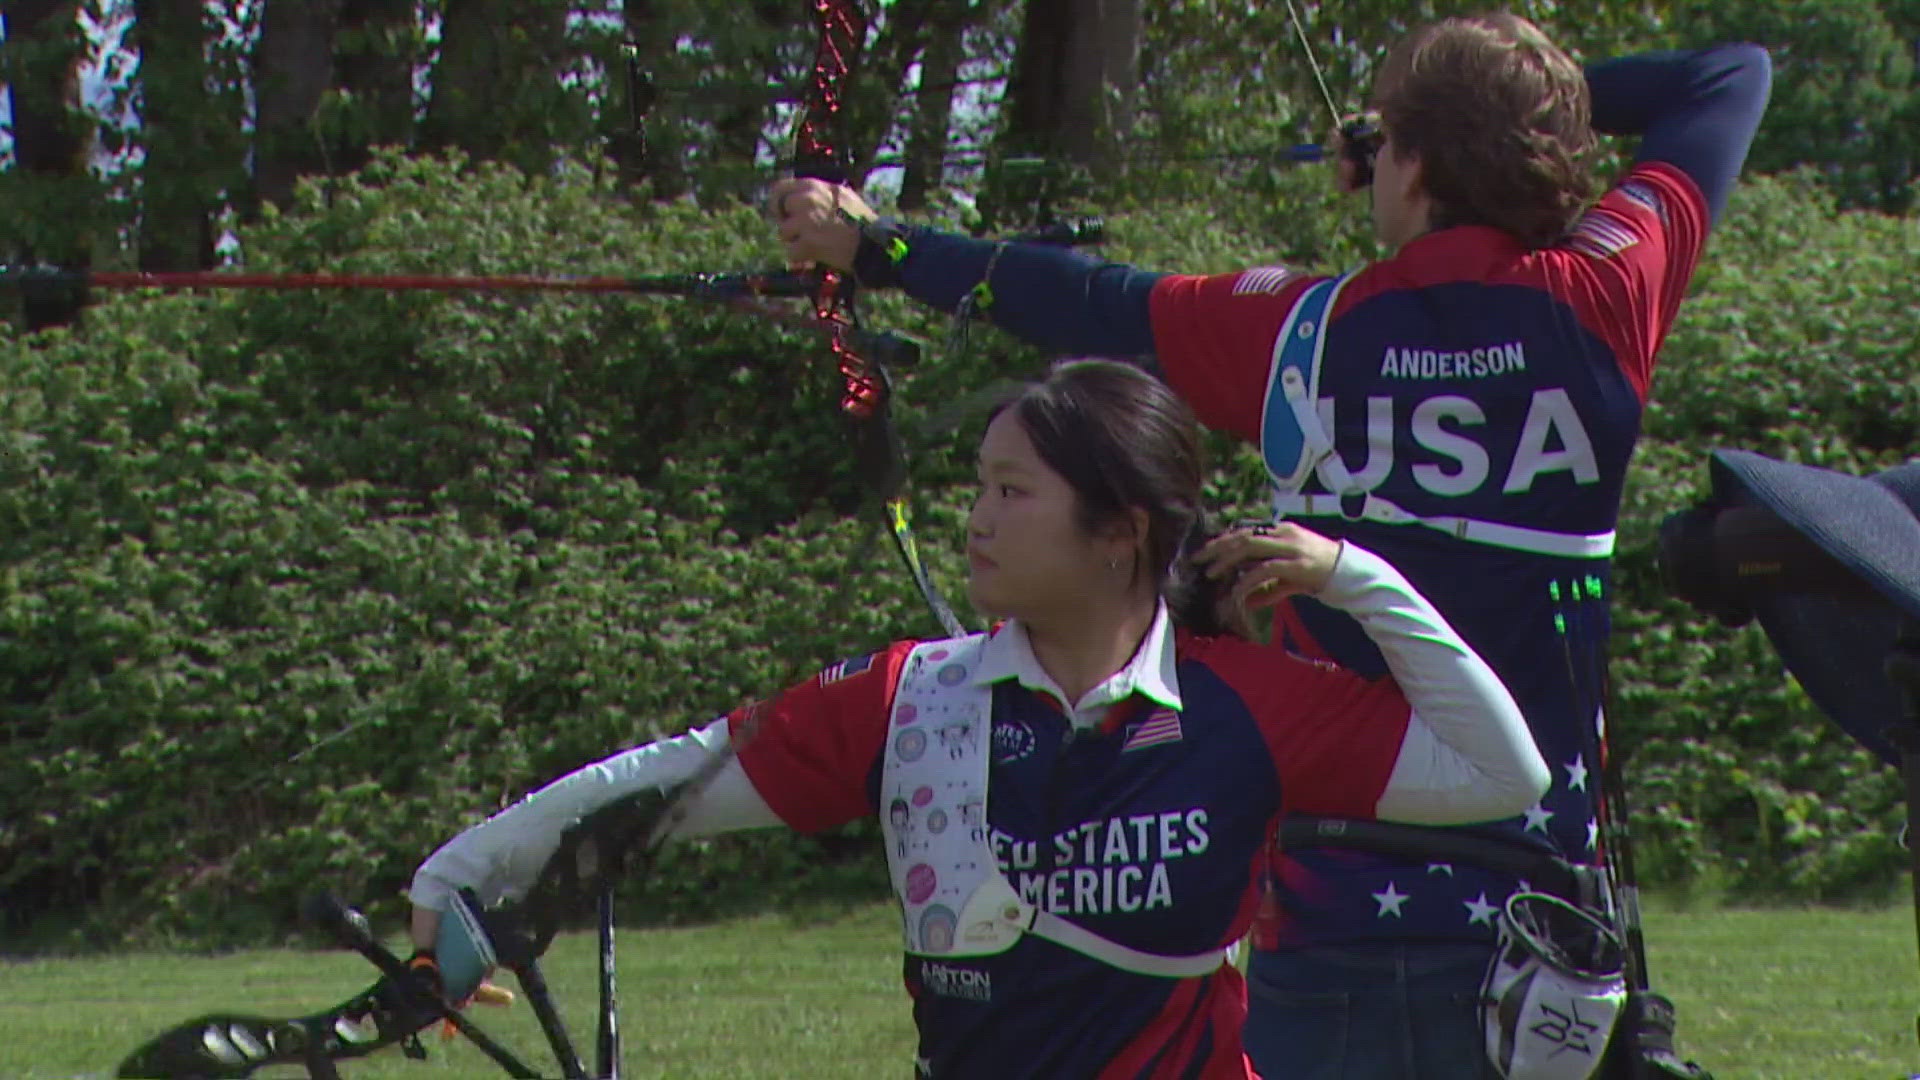 Emma Kim and Gabe Anderson are hoping to fulfill their Olympic dreams this summer.